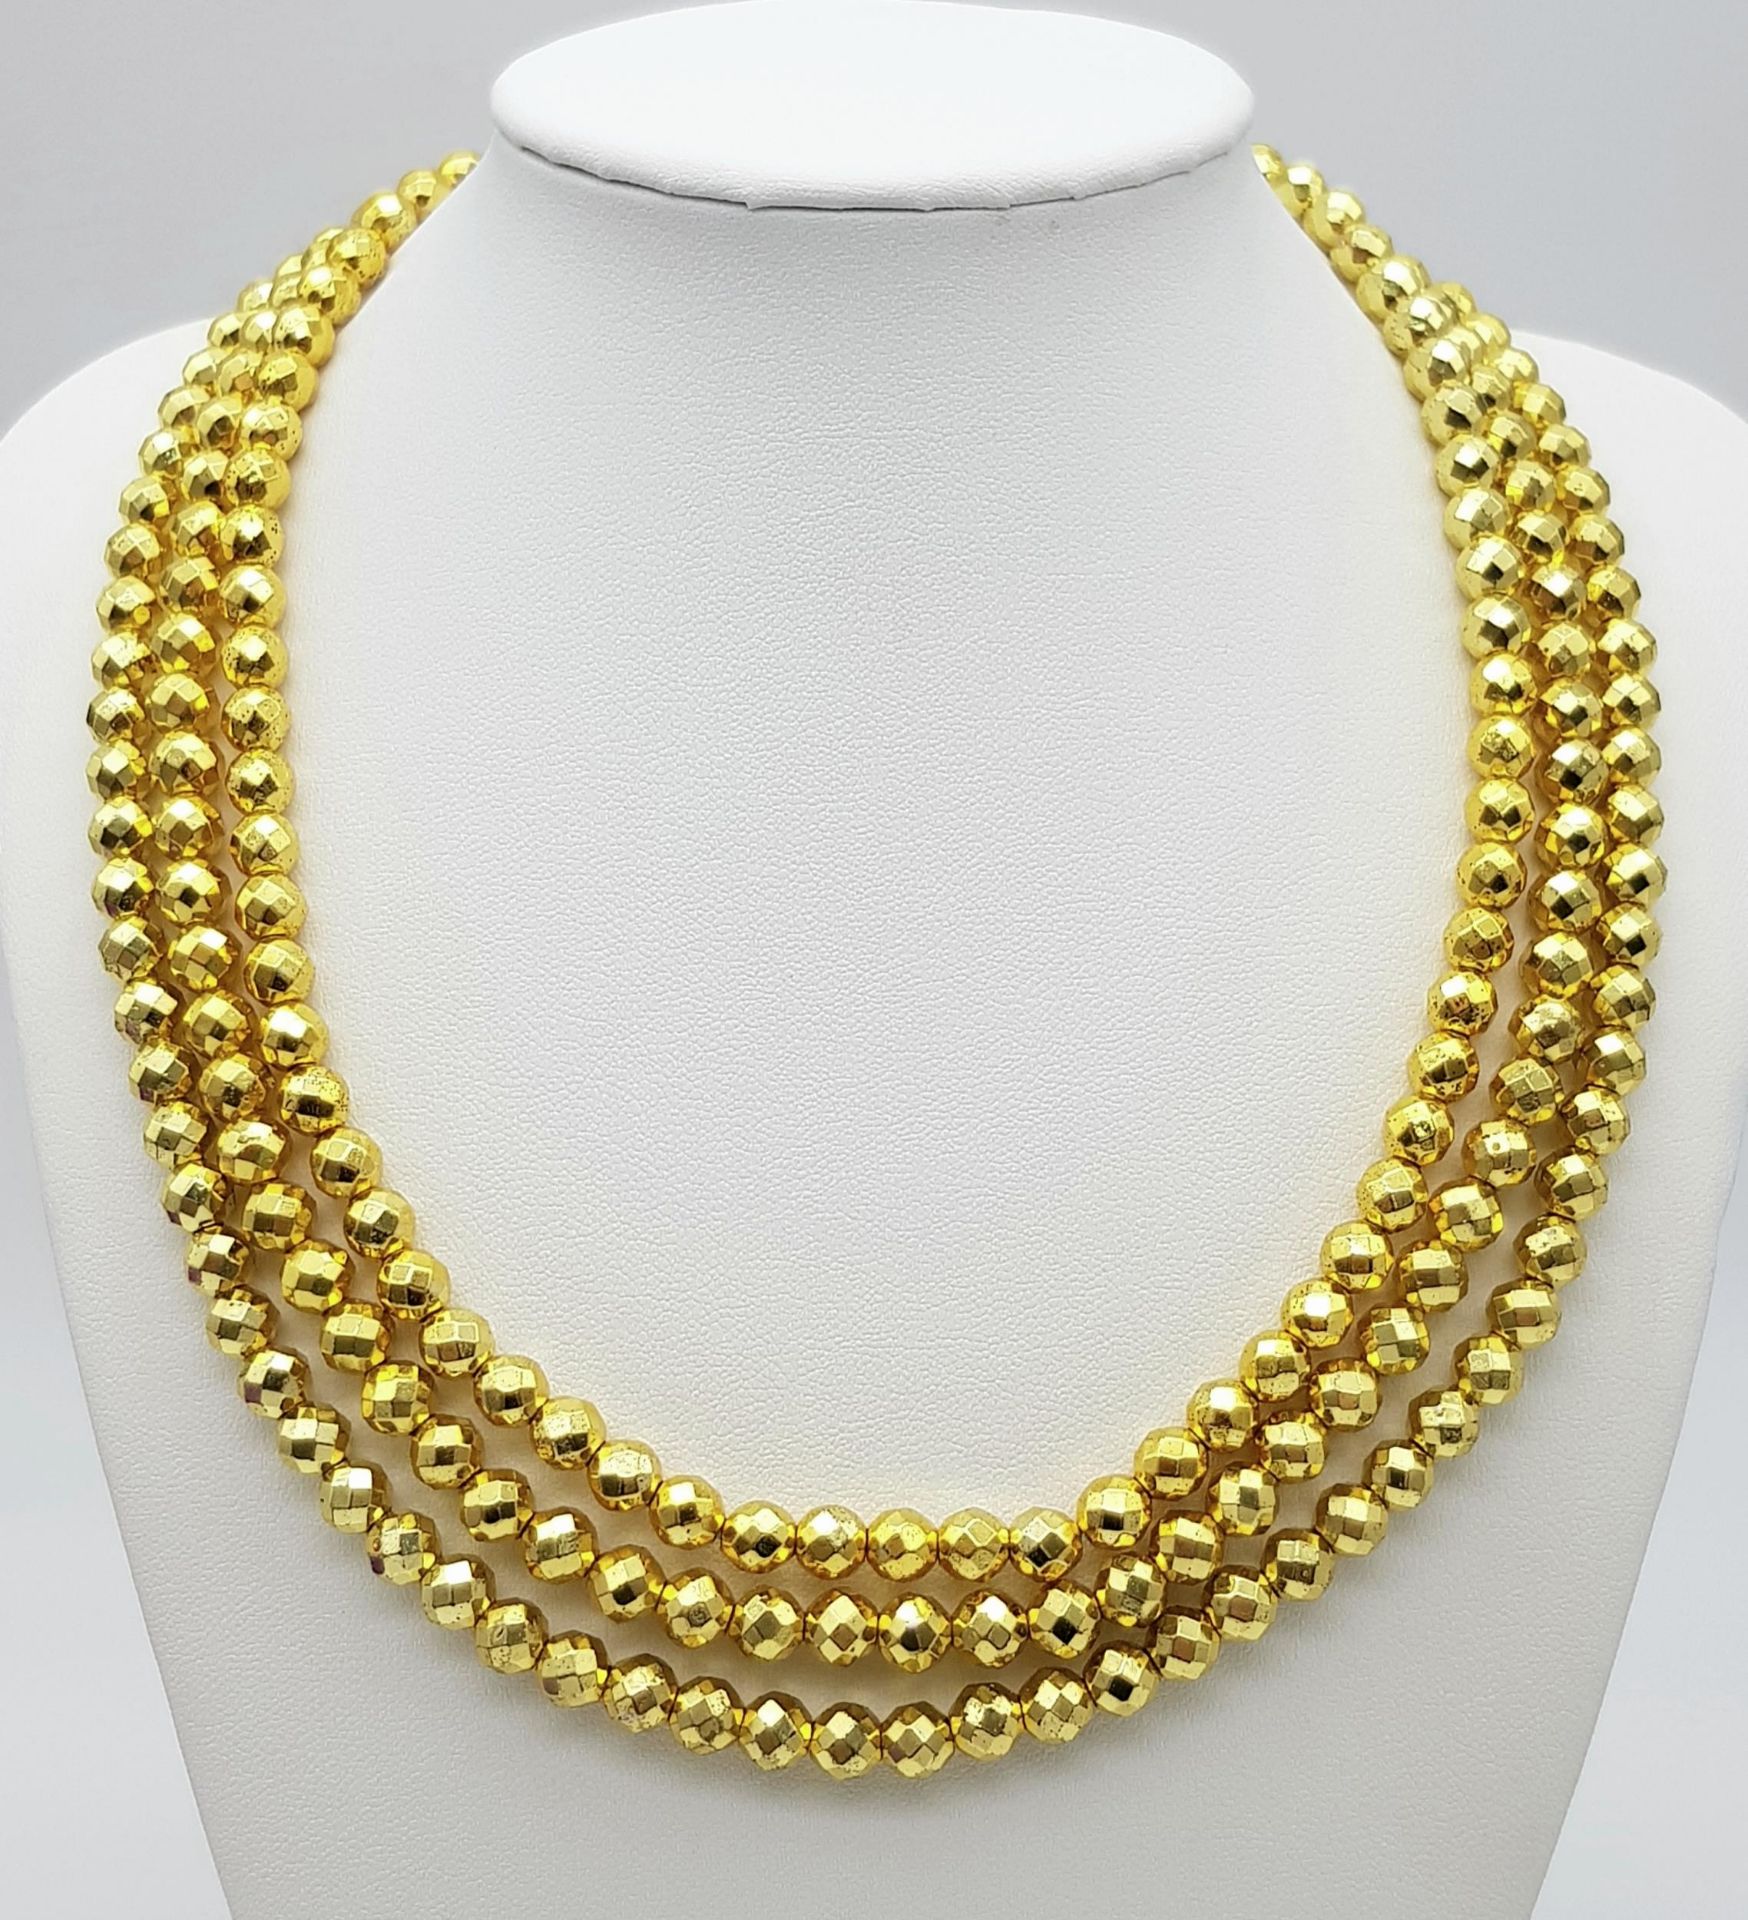 A Limited Edition (1 of 200), 679.65 Carat, Gold Haematite Bead Necklace. Fully Certified